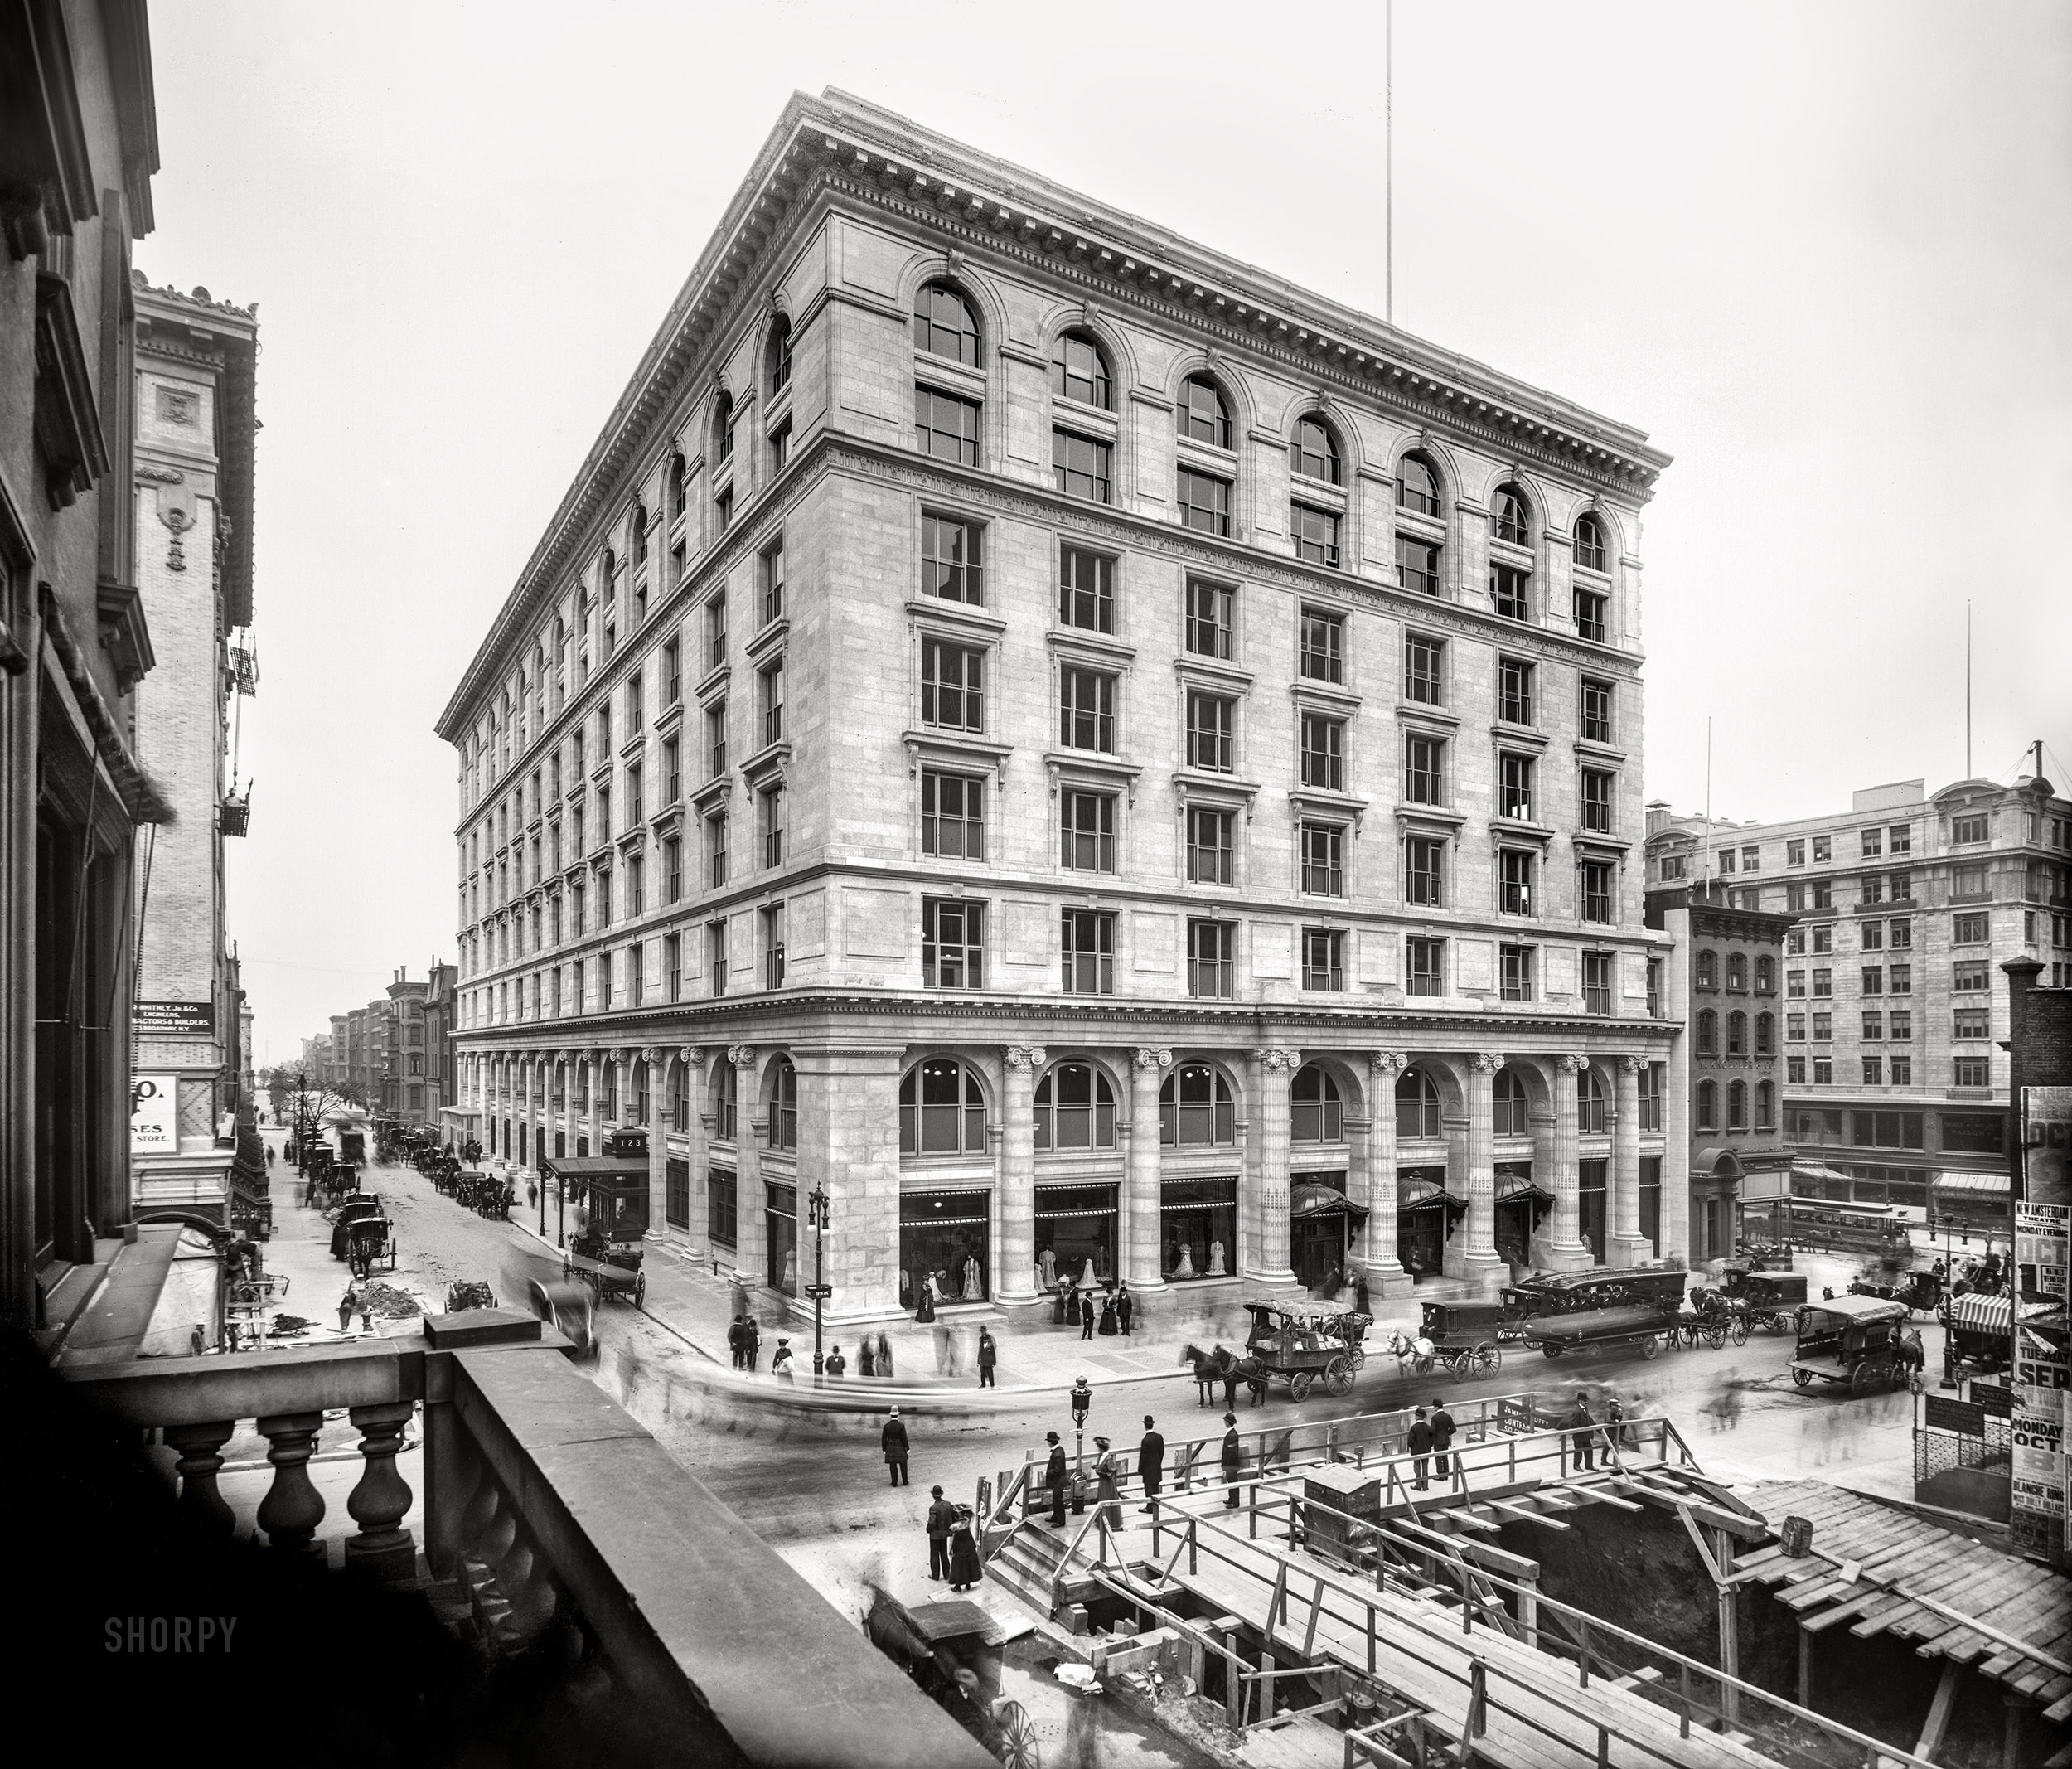 New York circa 1906. "B. Altman store, Fifth Avenue and East 35th Street." Last seen here. 8x10 inch dry plate glass negative, Detroit Publishing Company. View full size.